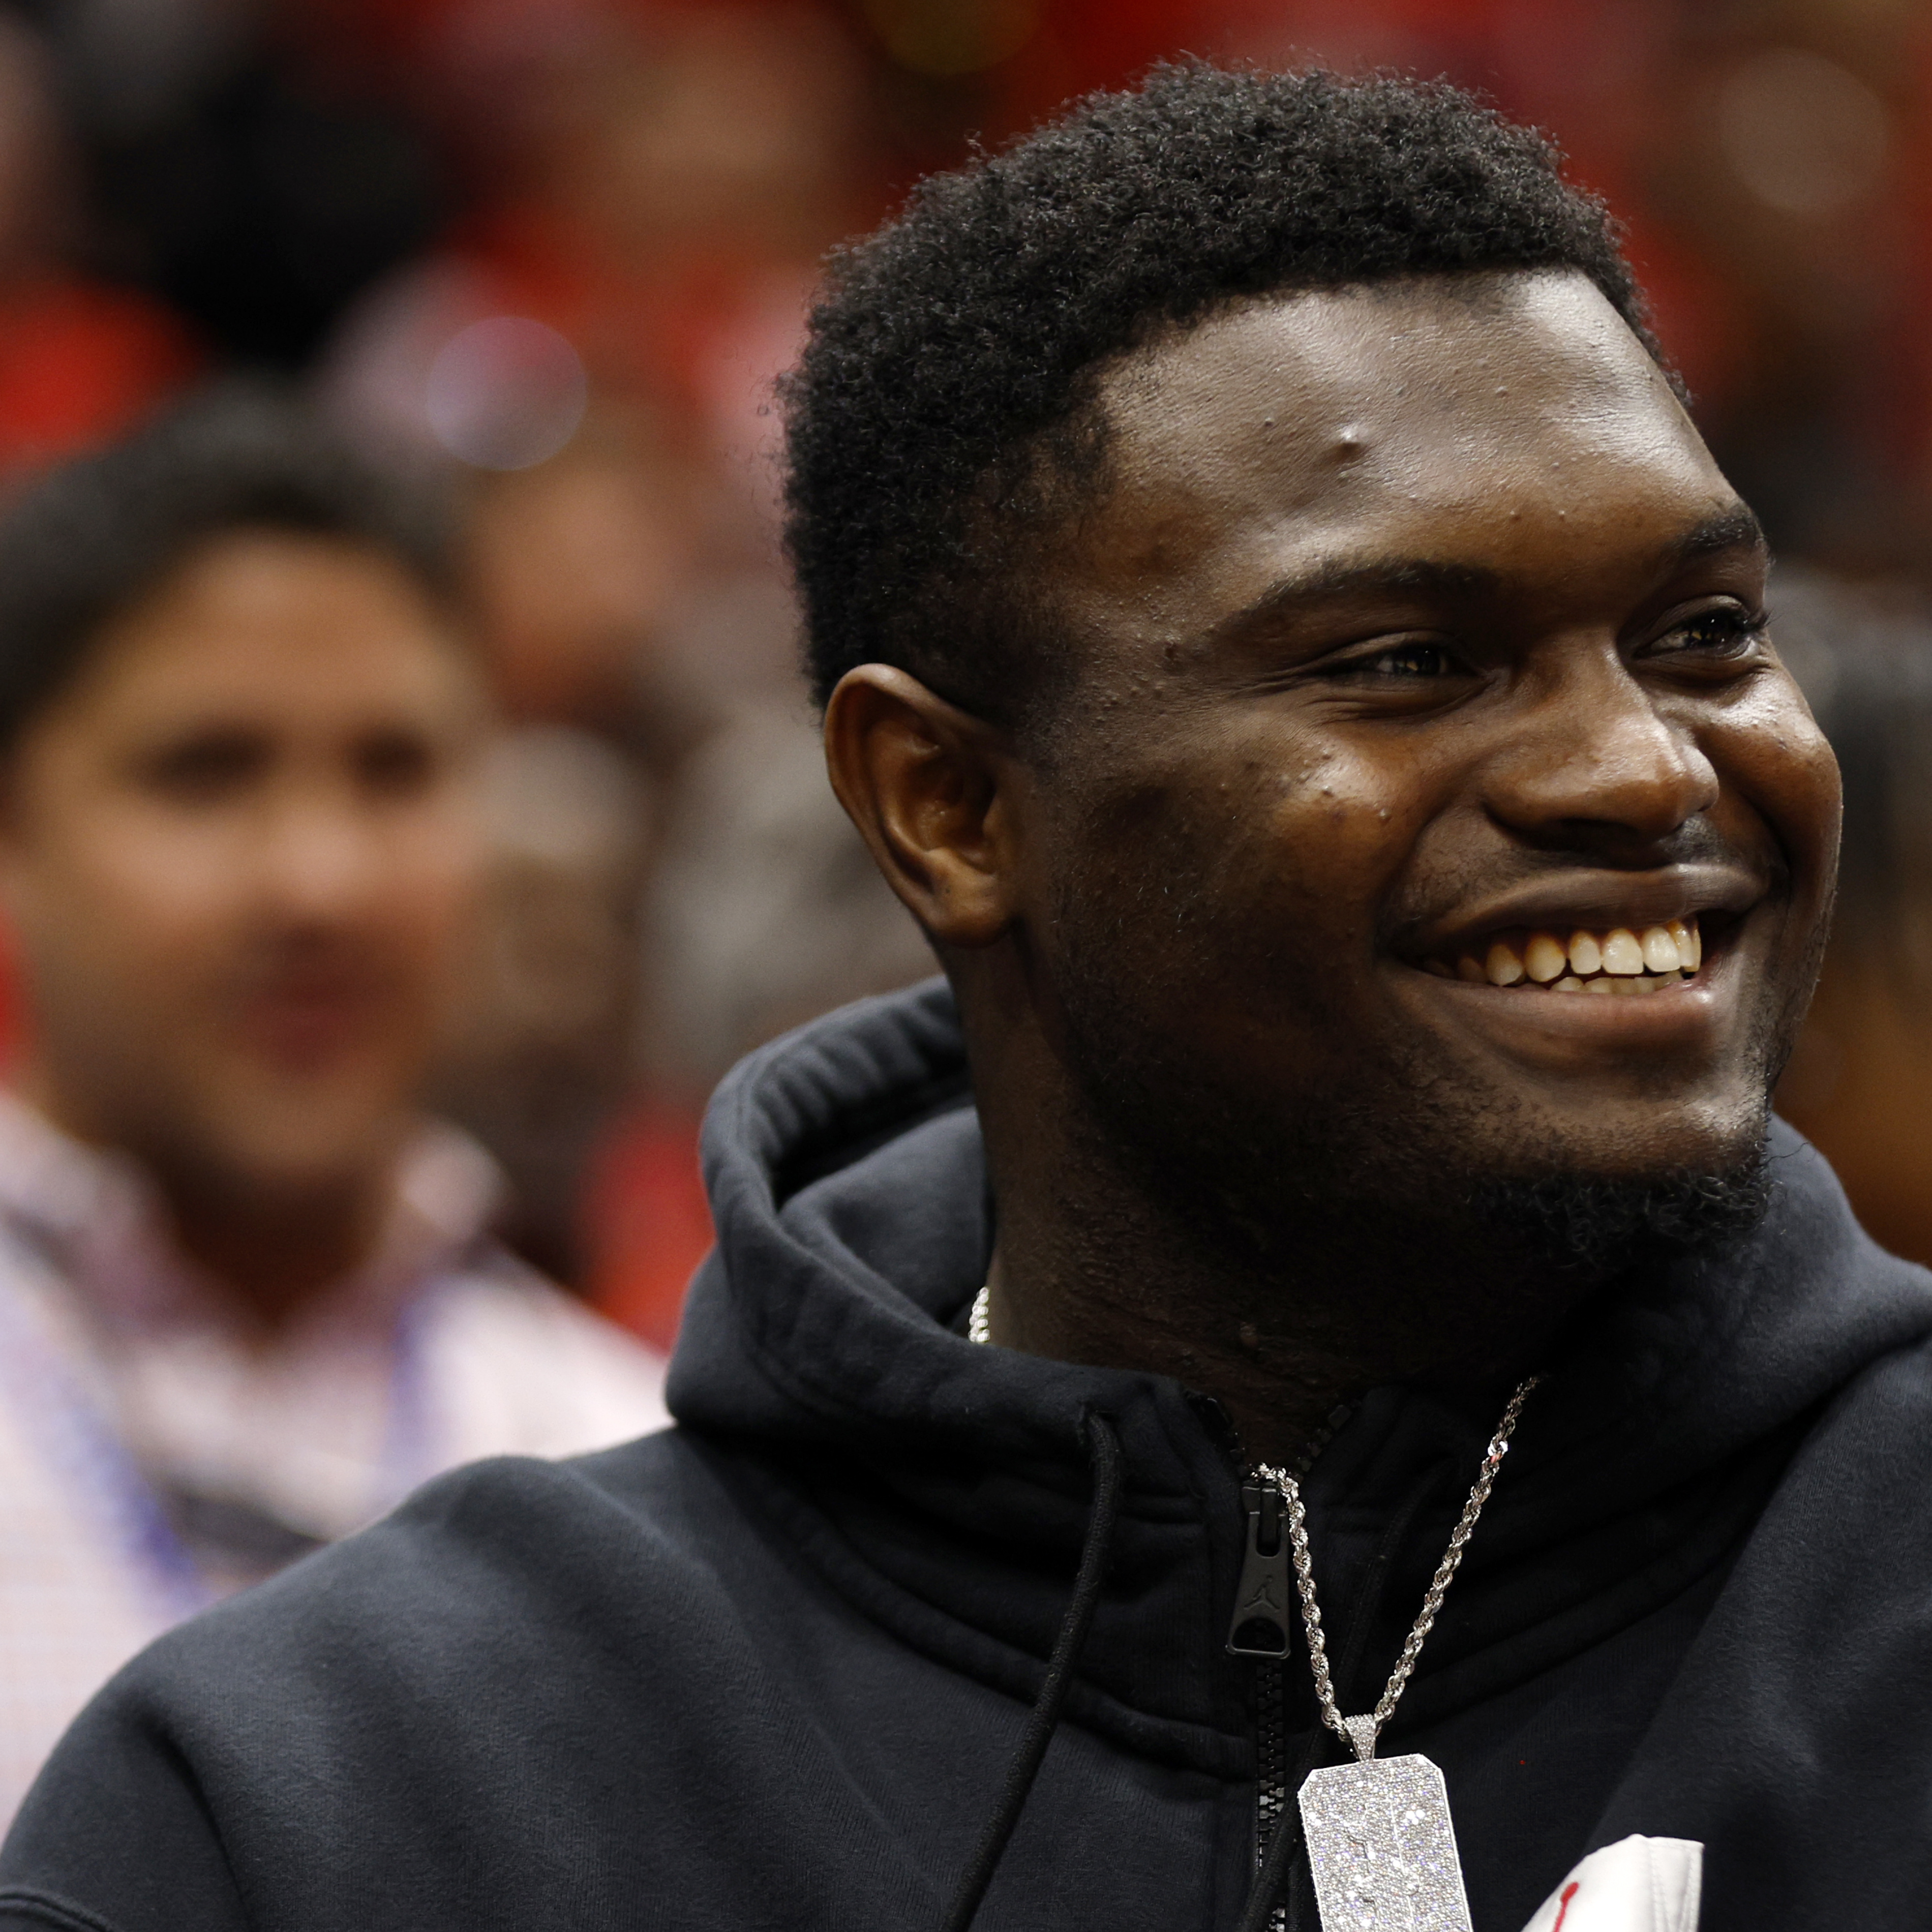 Zion Williamson Rumors: Pelicans Max Contract Includes Injury Protections